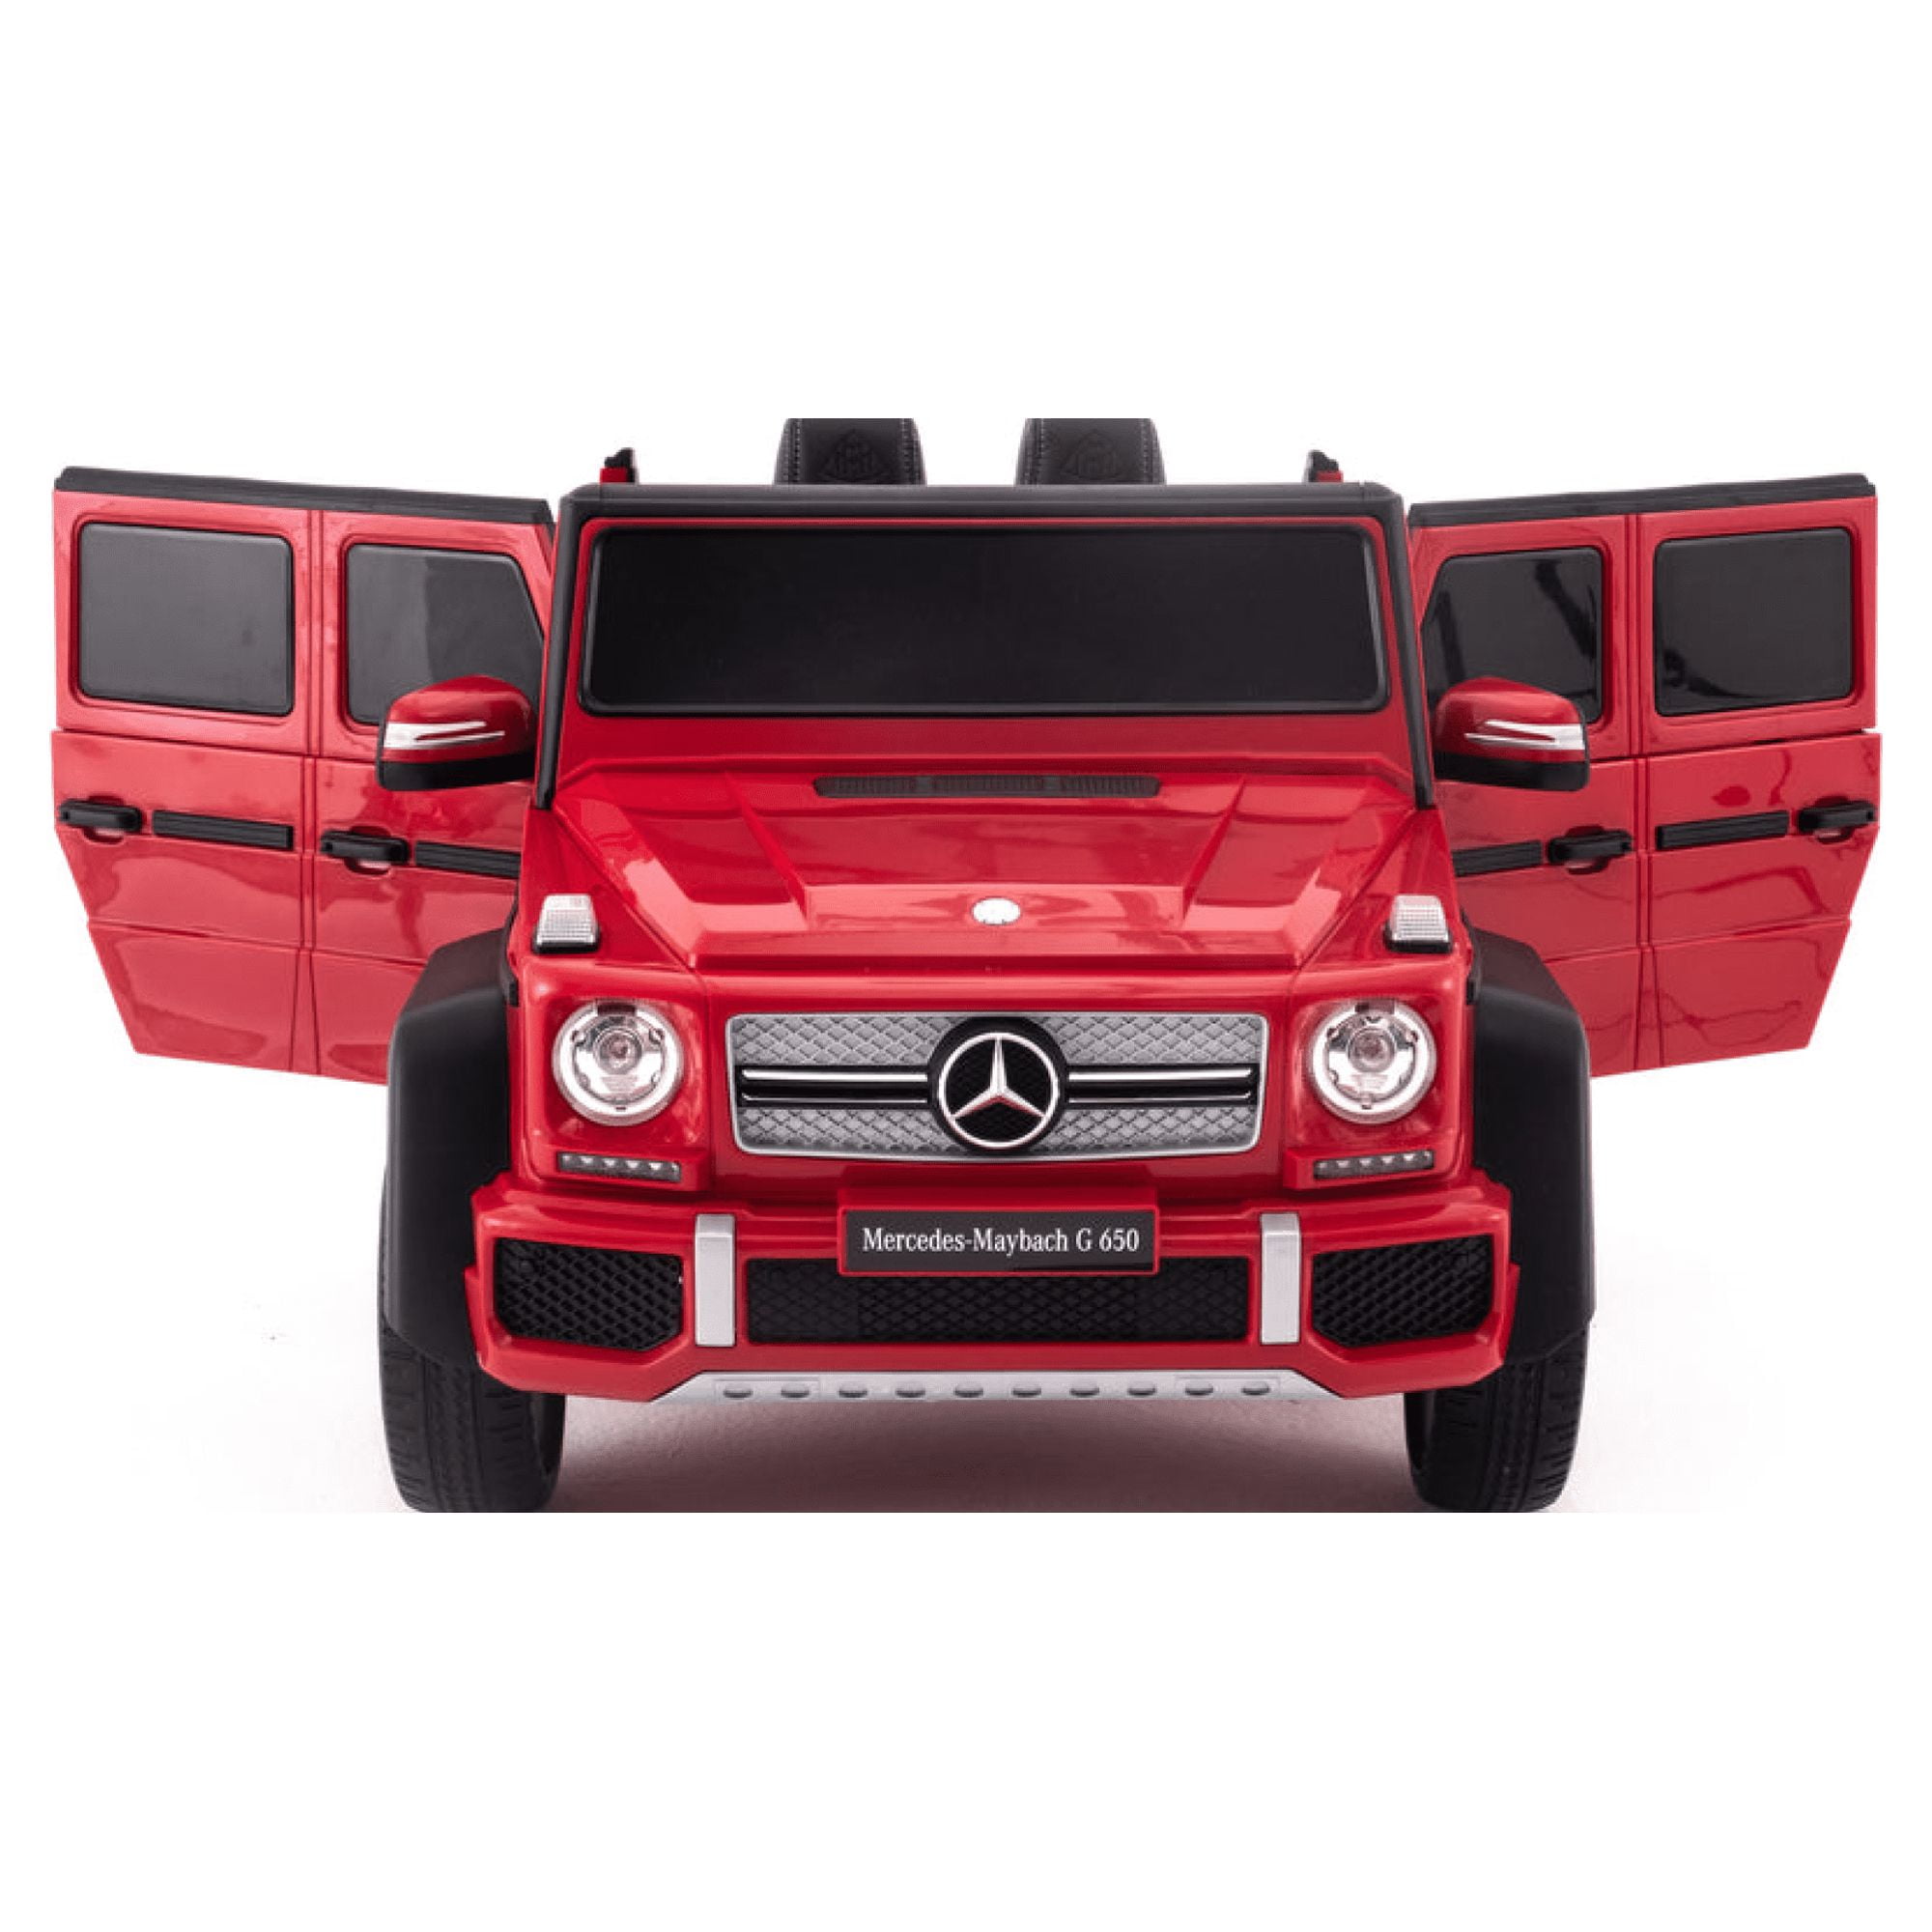 2023 Mercedes Maybach G650 Ride On Kids Toy Car 12V AMG Upgraded Version w/  Remote Control, MP3, 3 Speeds, LED Lights - Pink 